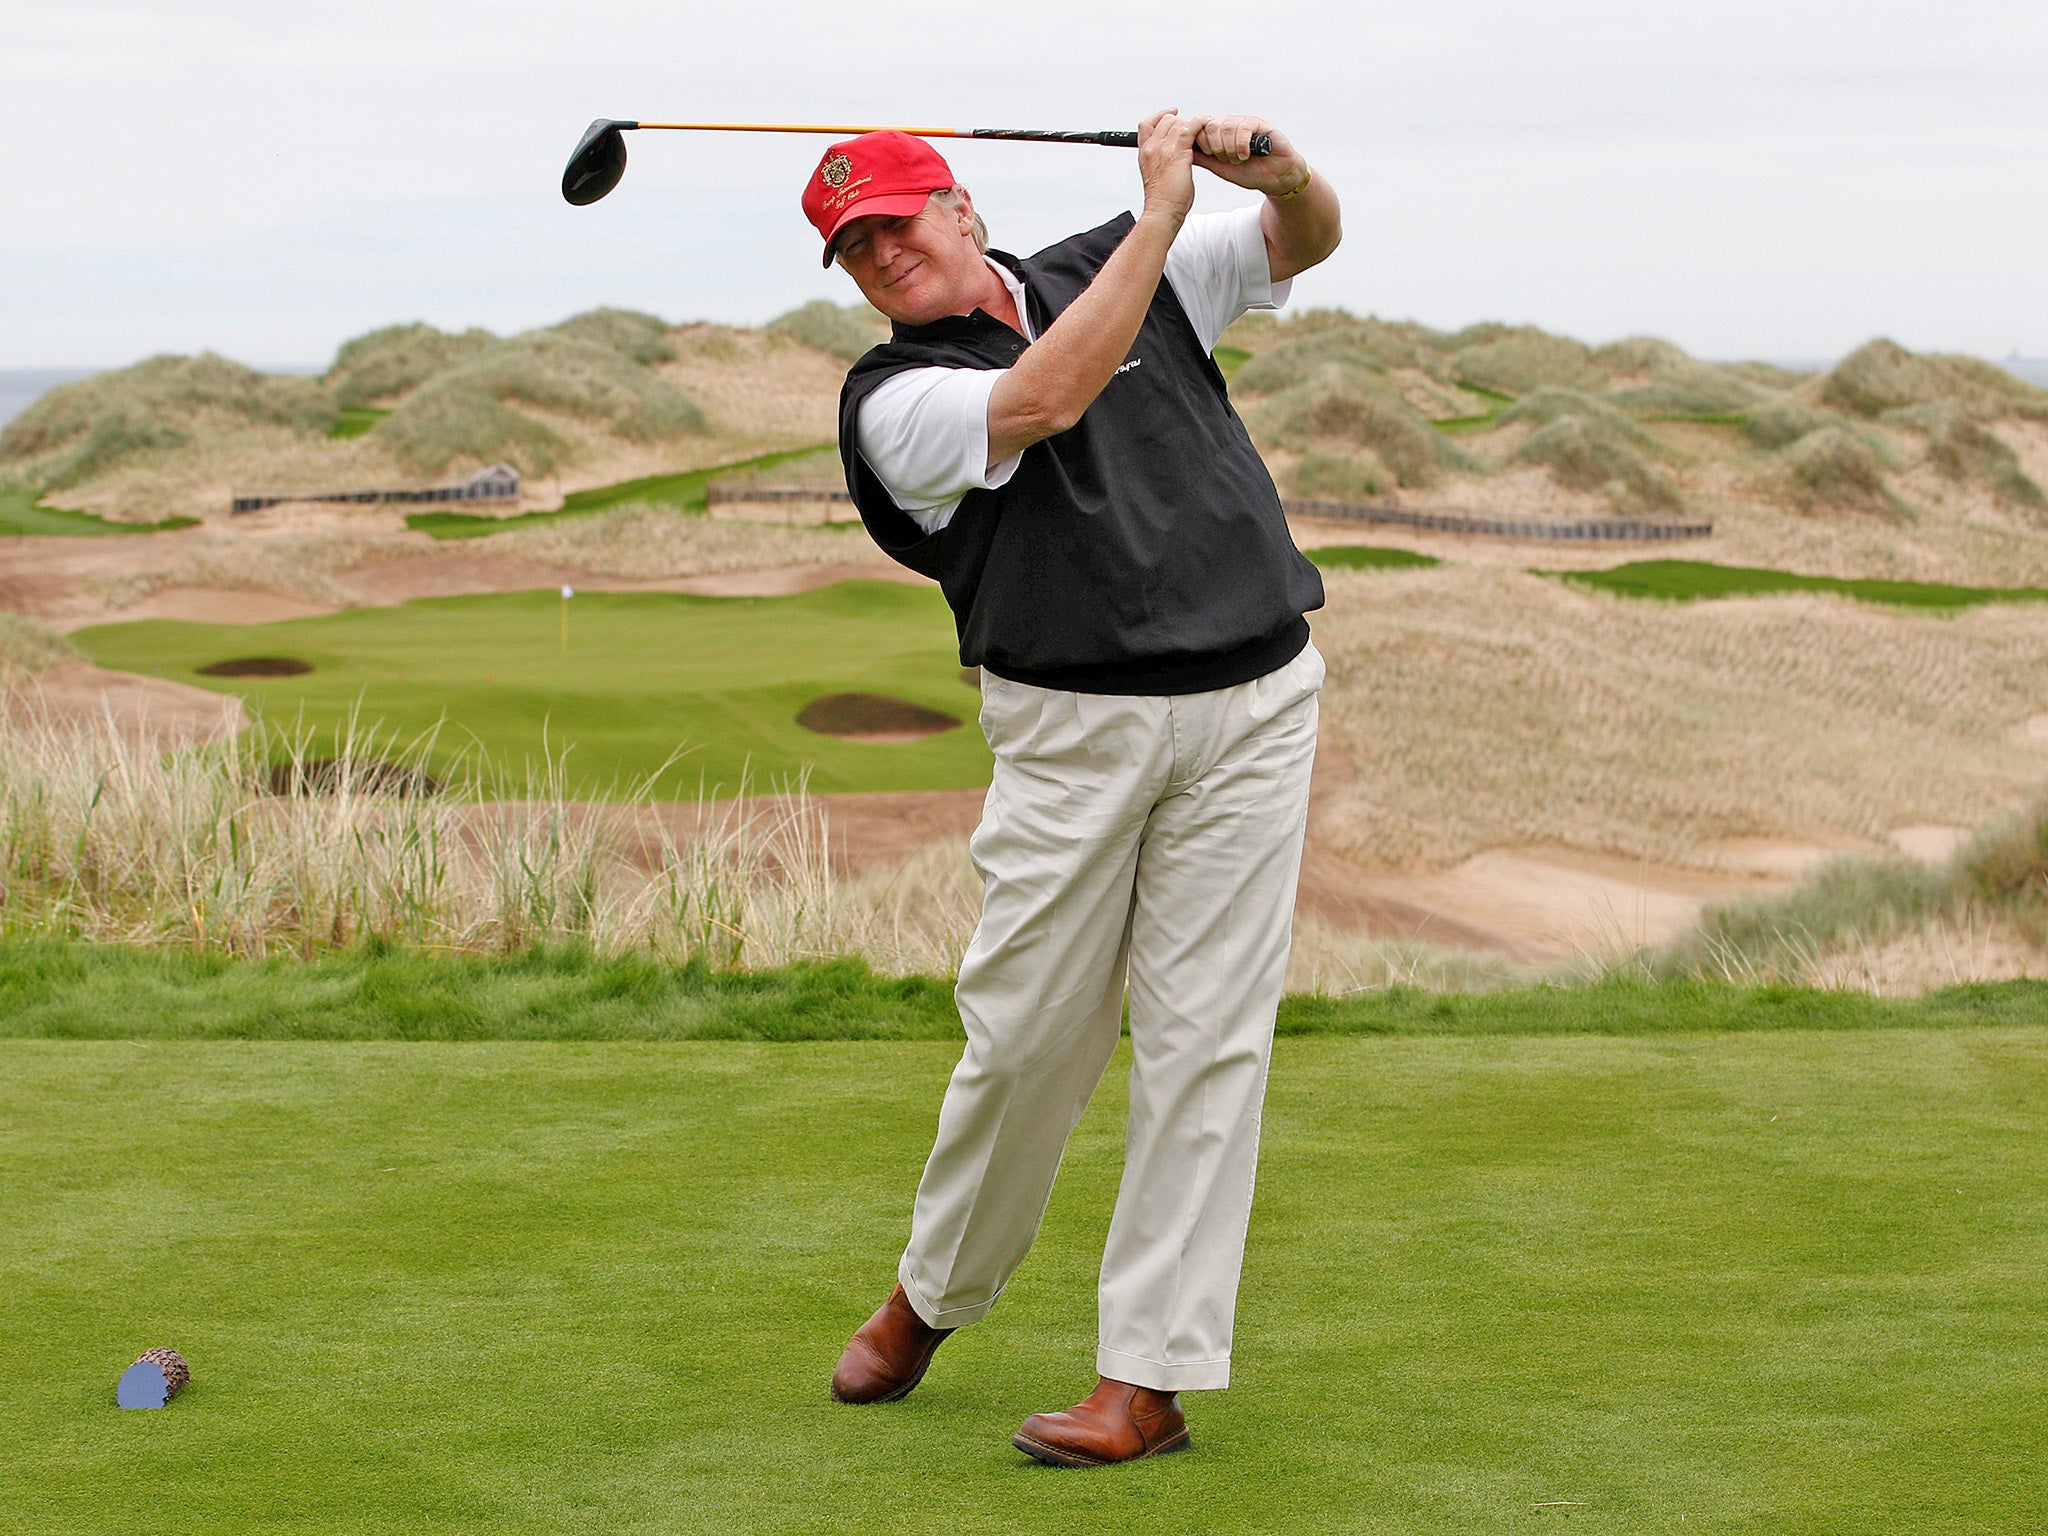 President Trump regularly rebuked Barack Obama for playing too much golf but has radically outpaced his predecessor